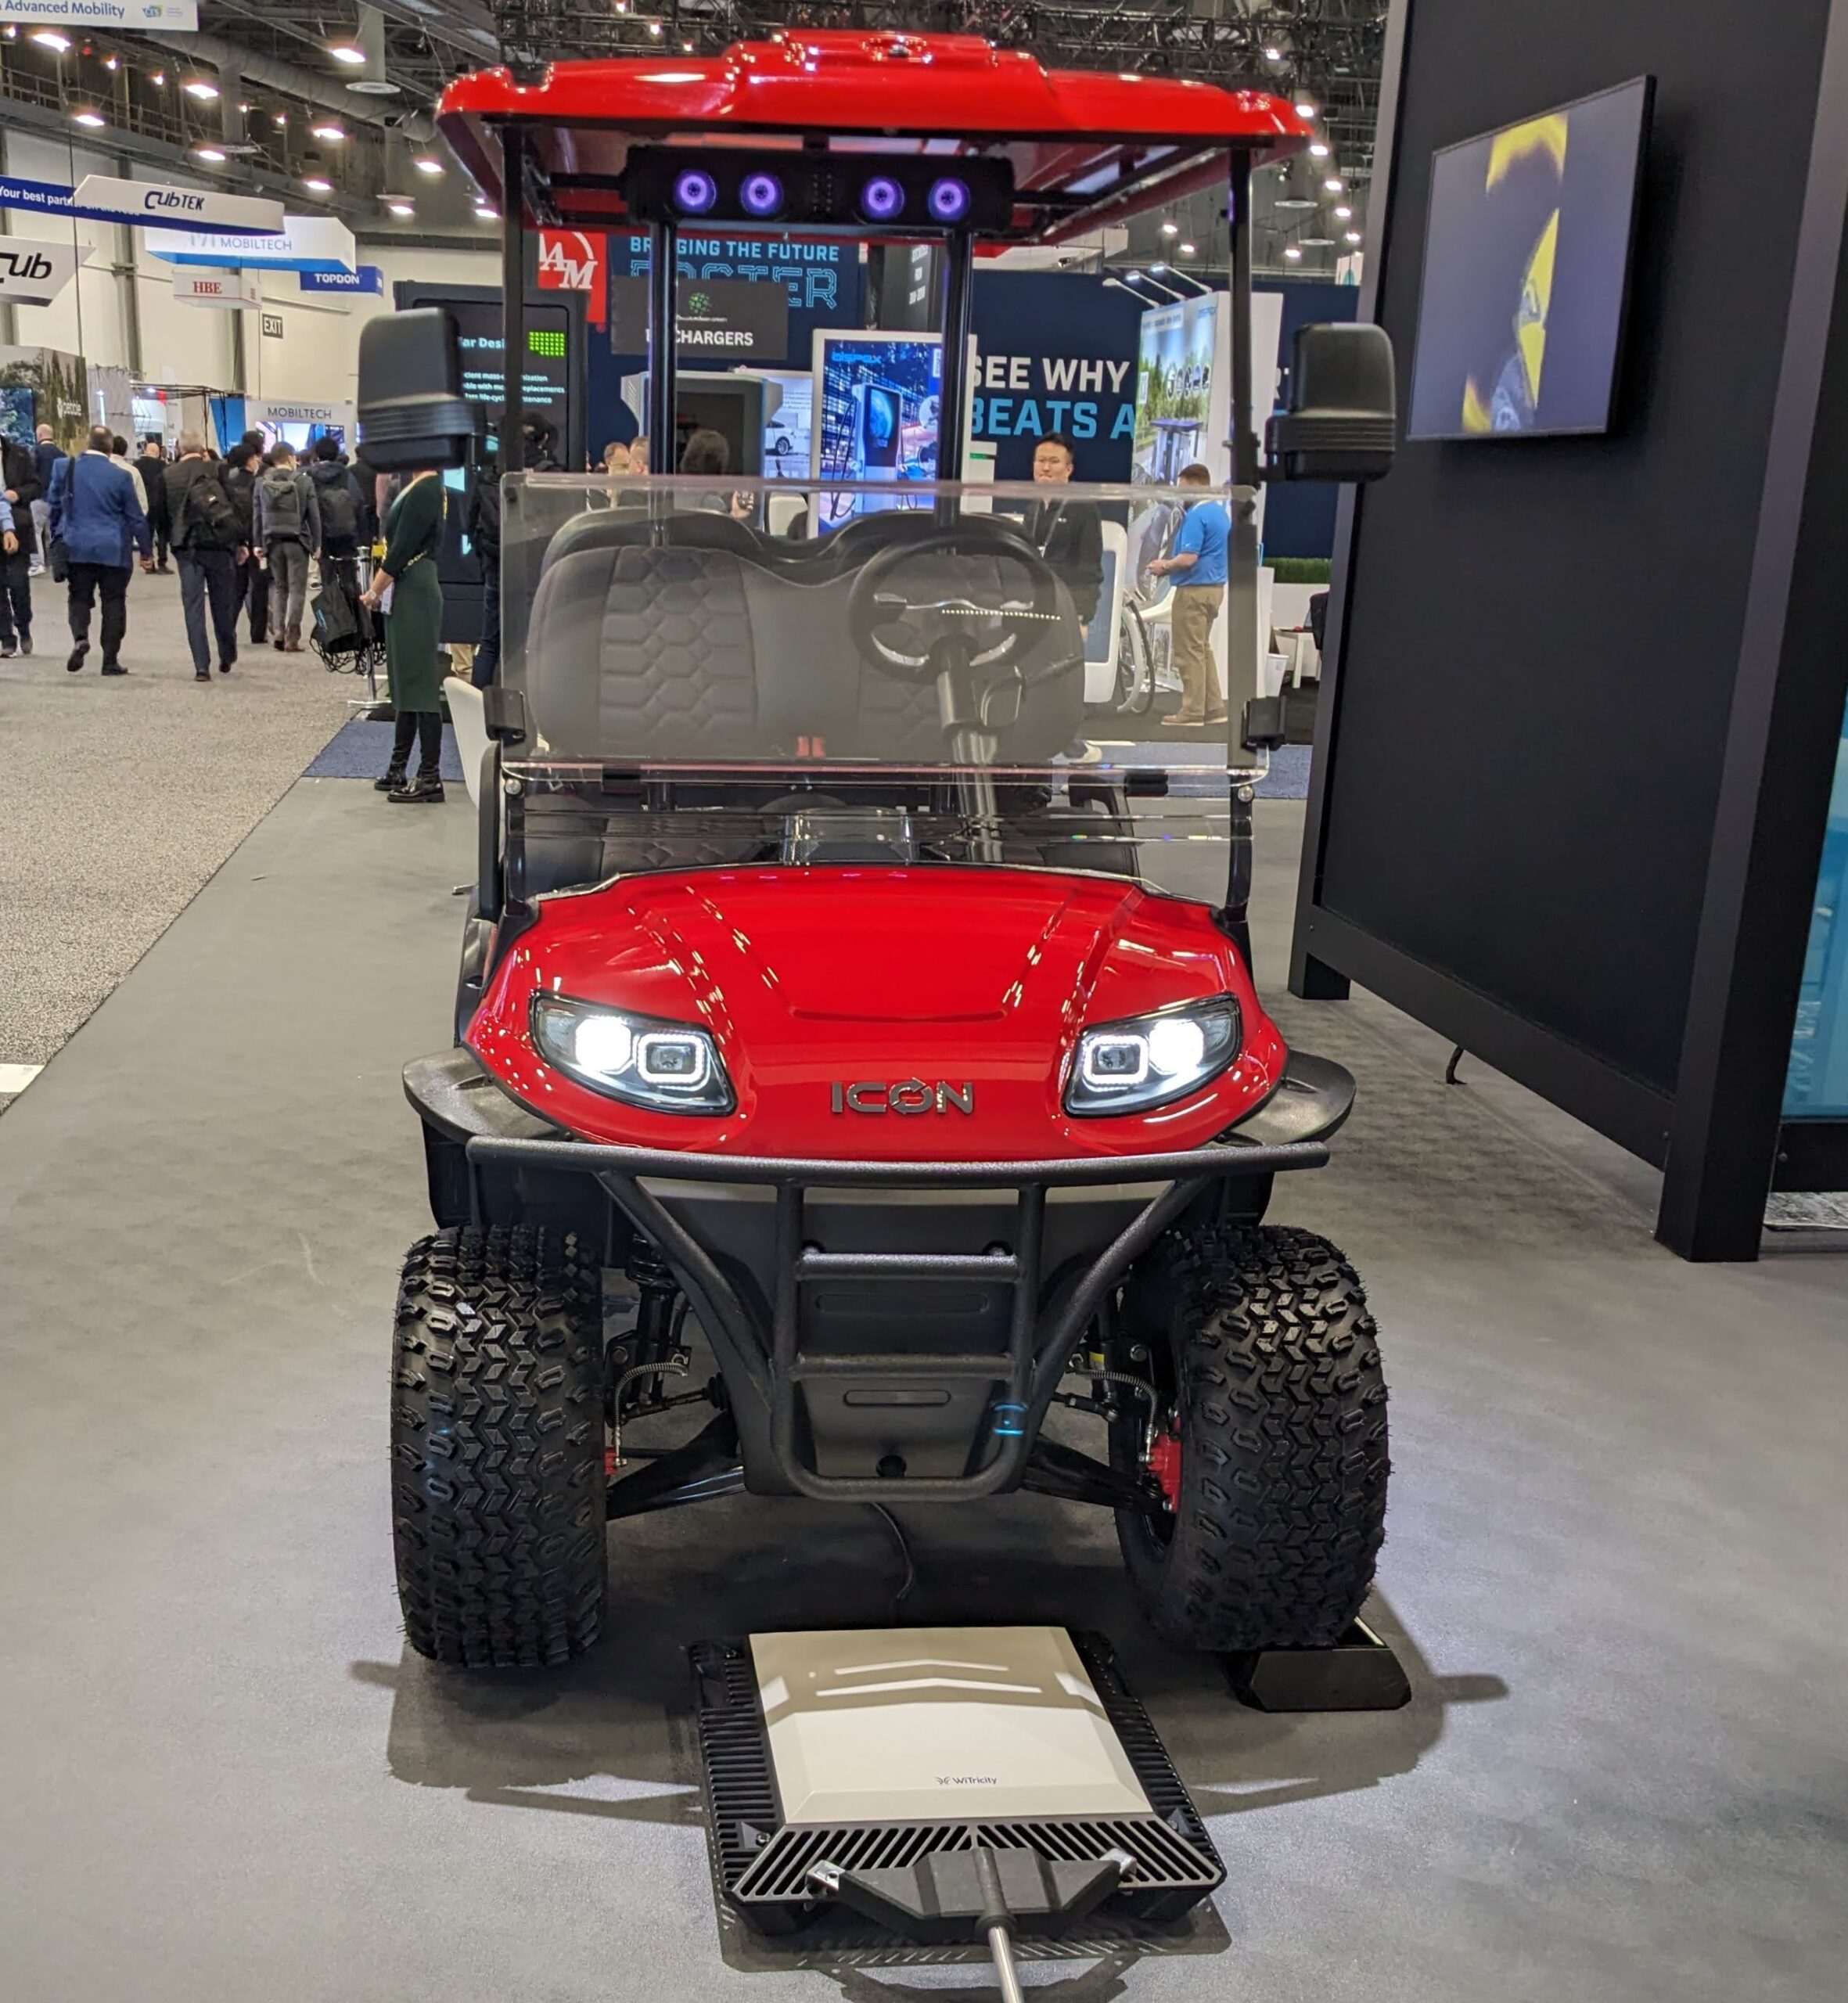 At CES, WiTricity's wireless charging solution is showcased with vehicles from numerous OEMs